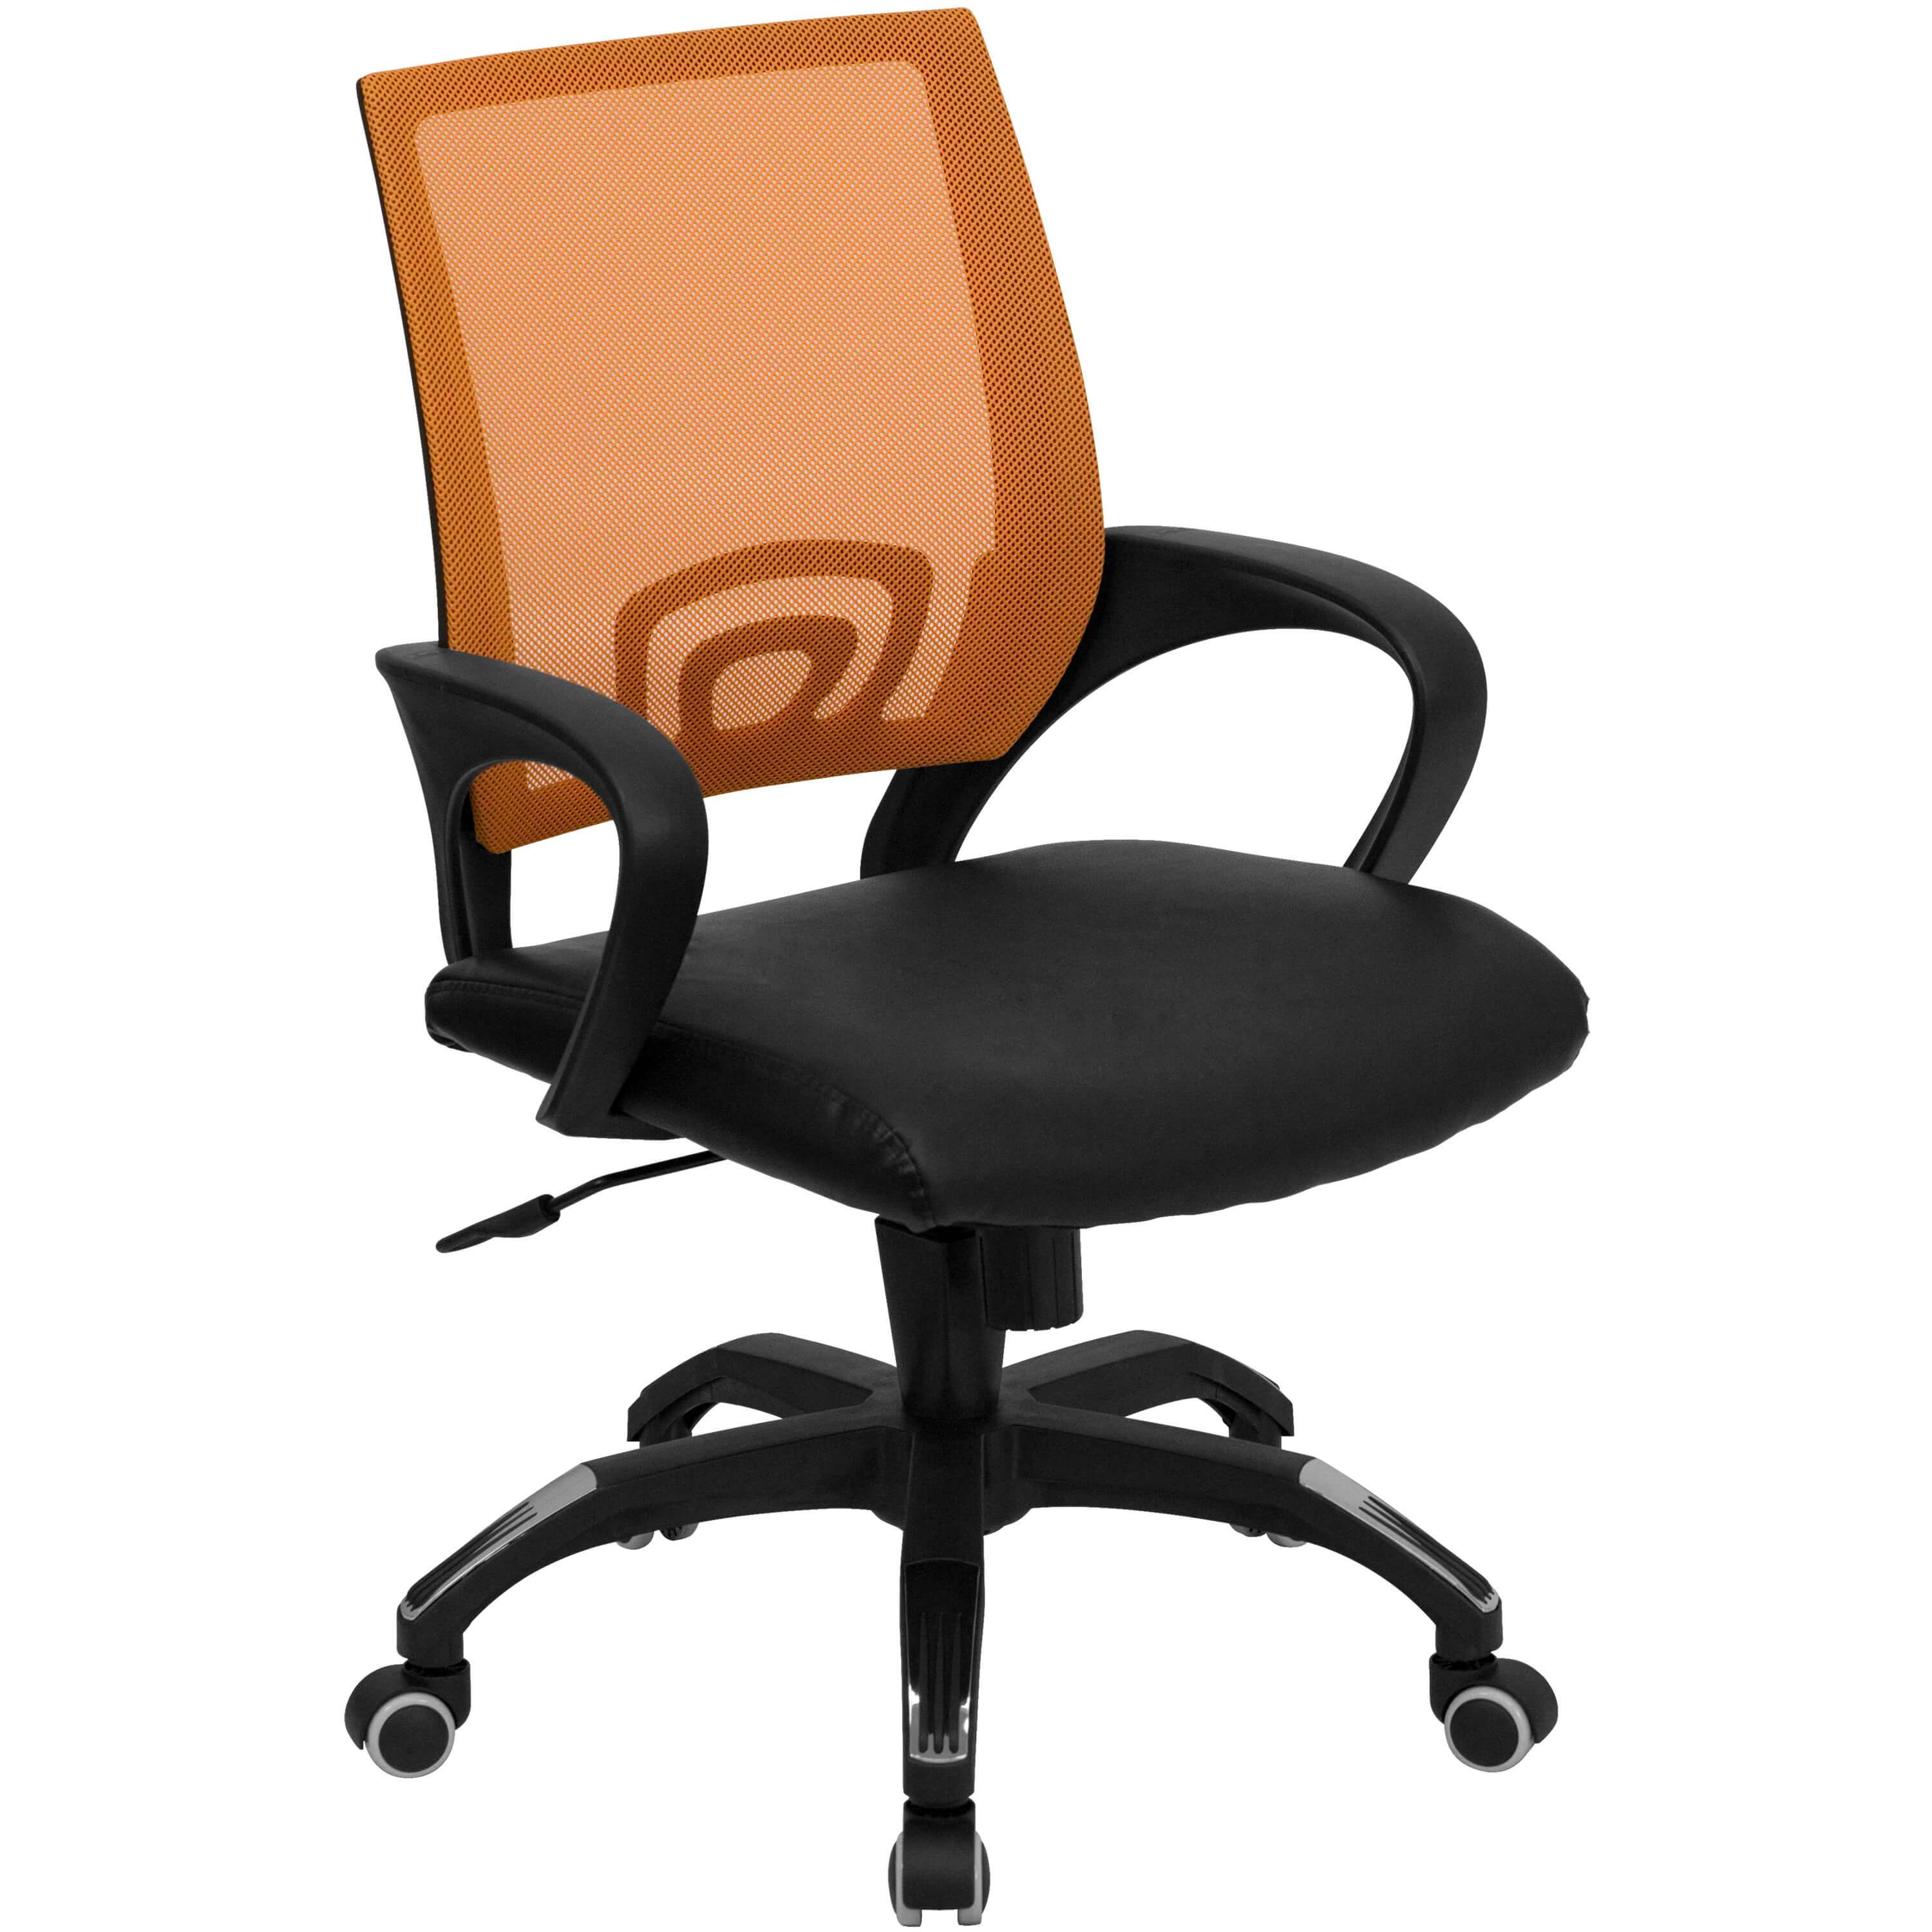 Cool office chairs comfortable office chair